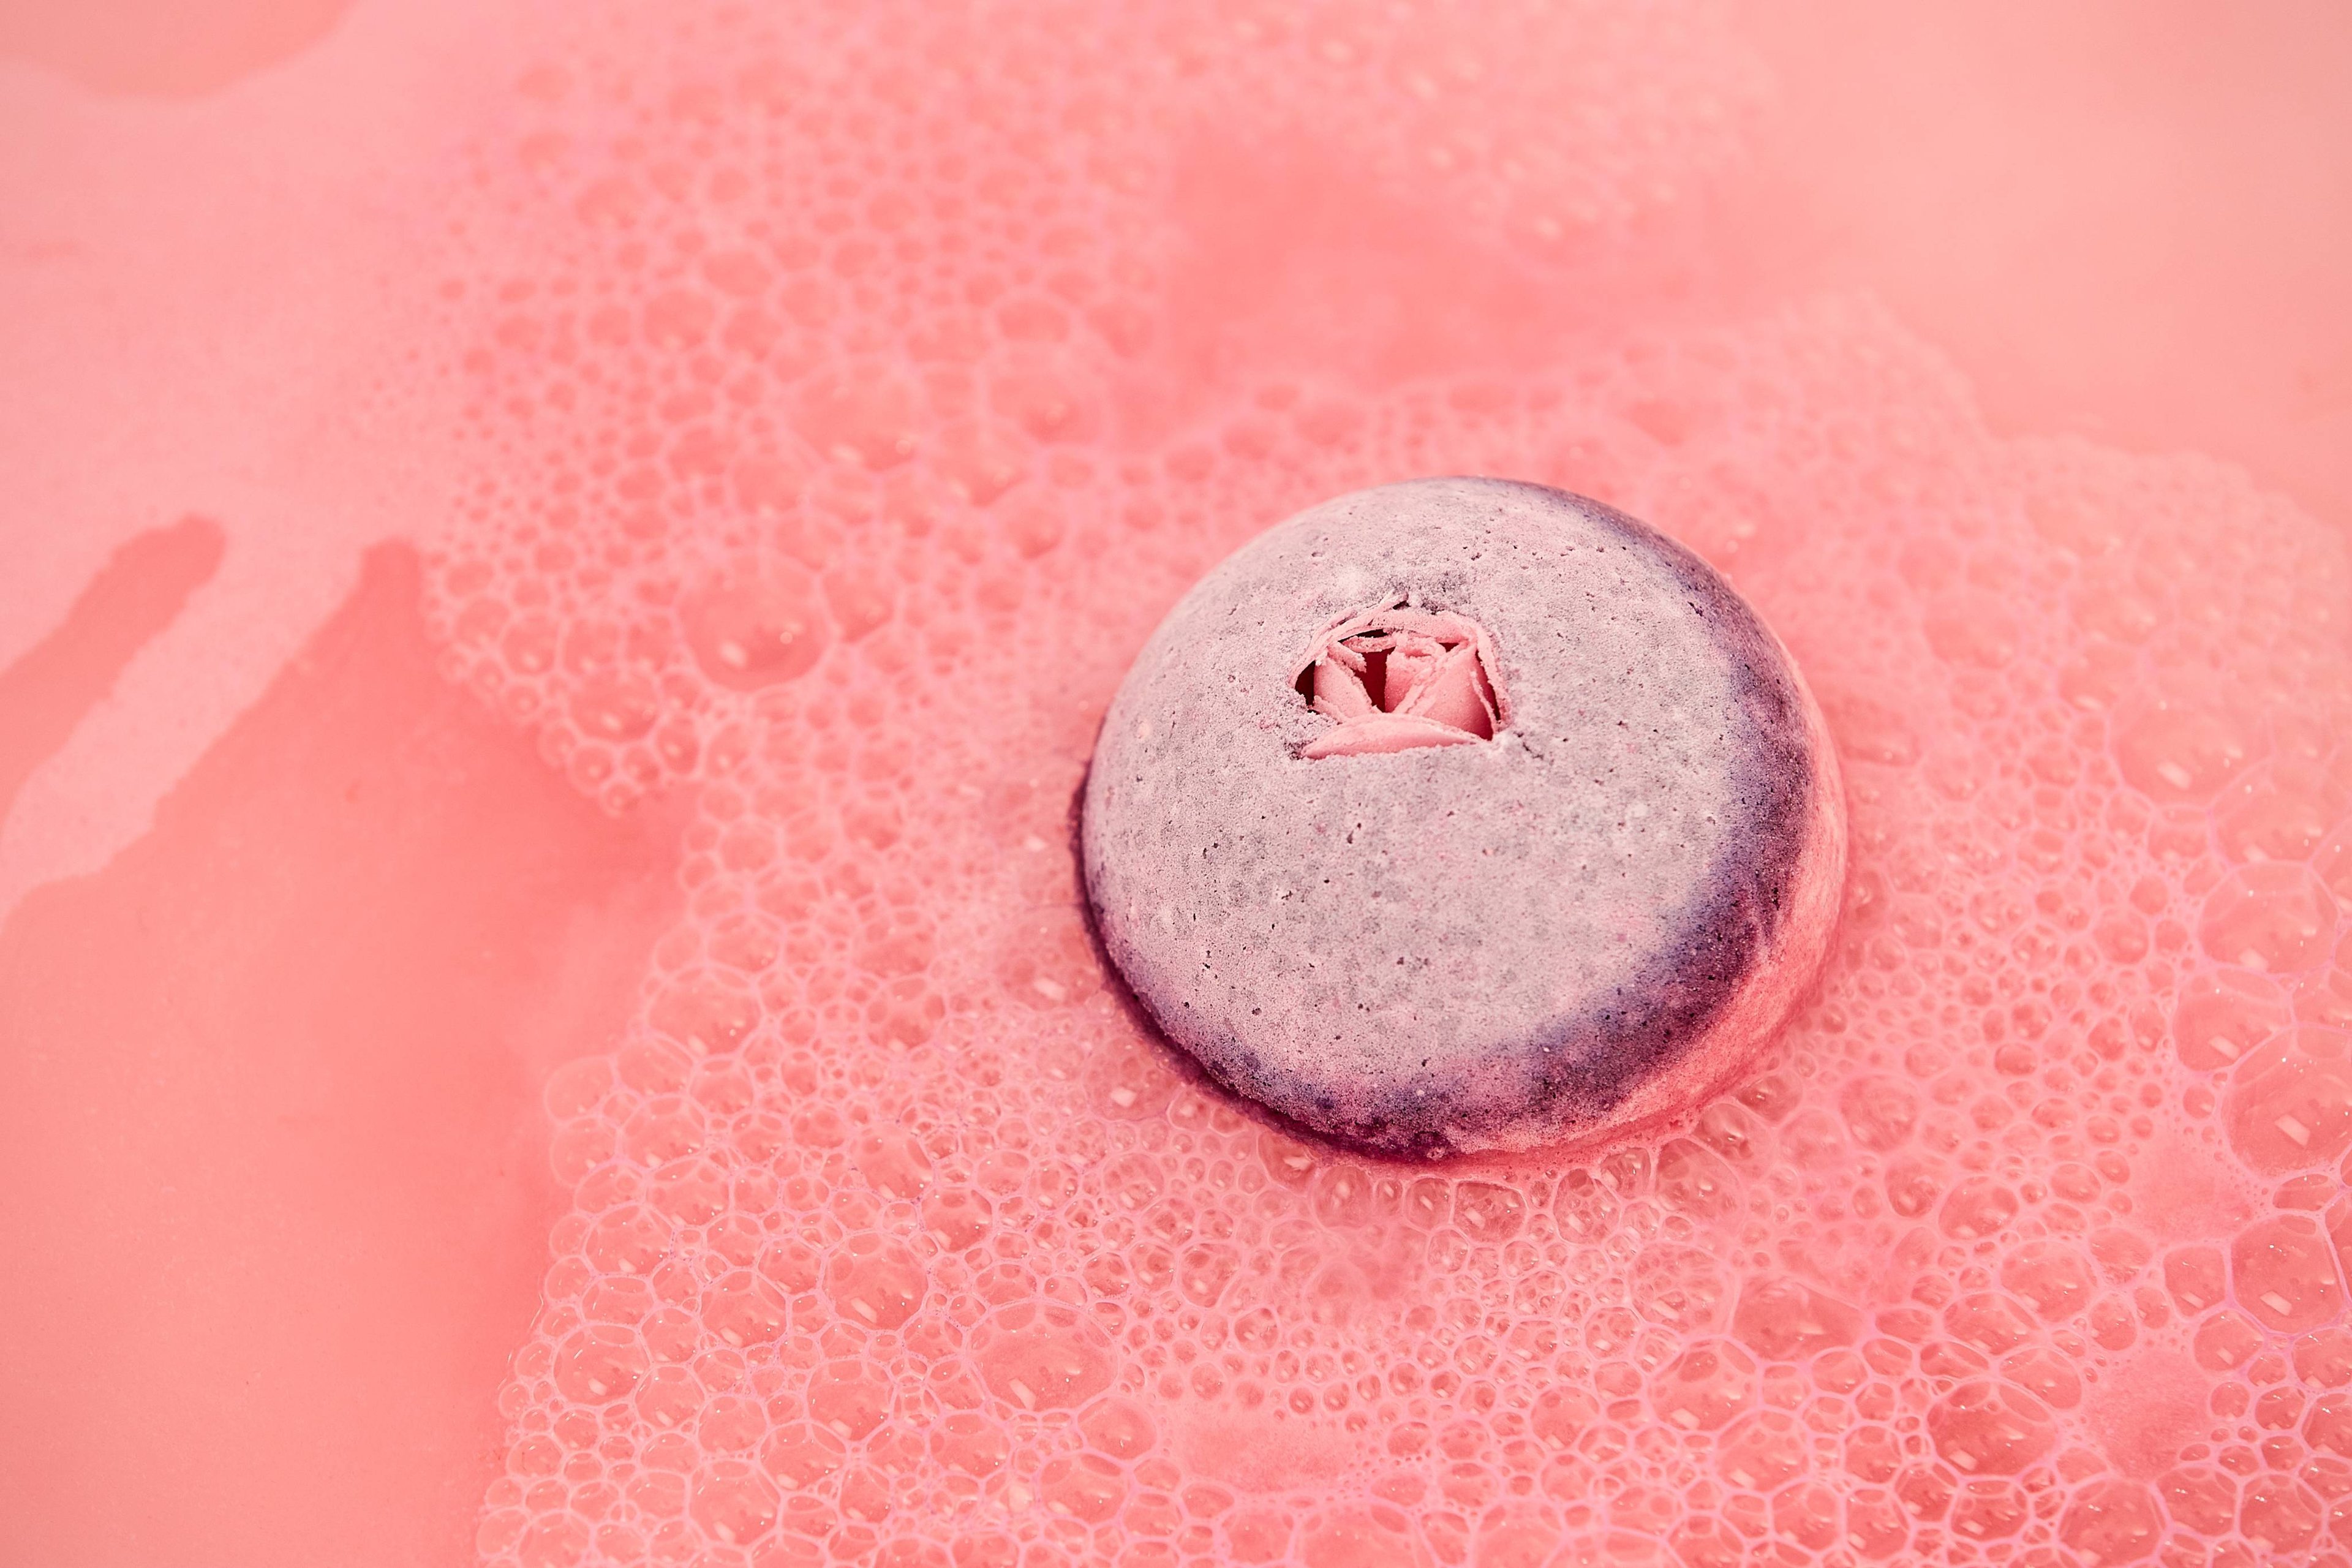 The lilac top and pink rose bud of Sex Bomb bath bomb sinks in pink frothy water.